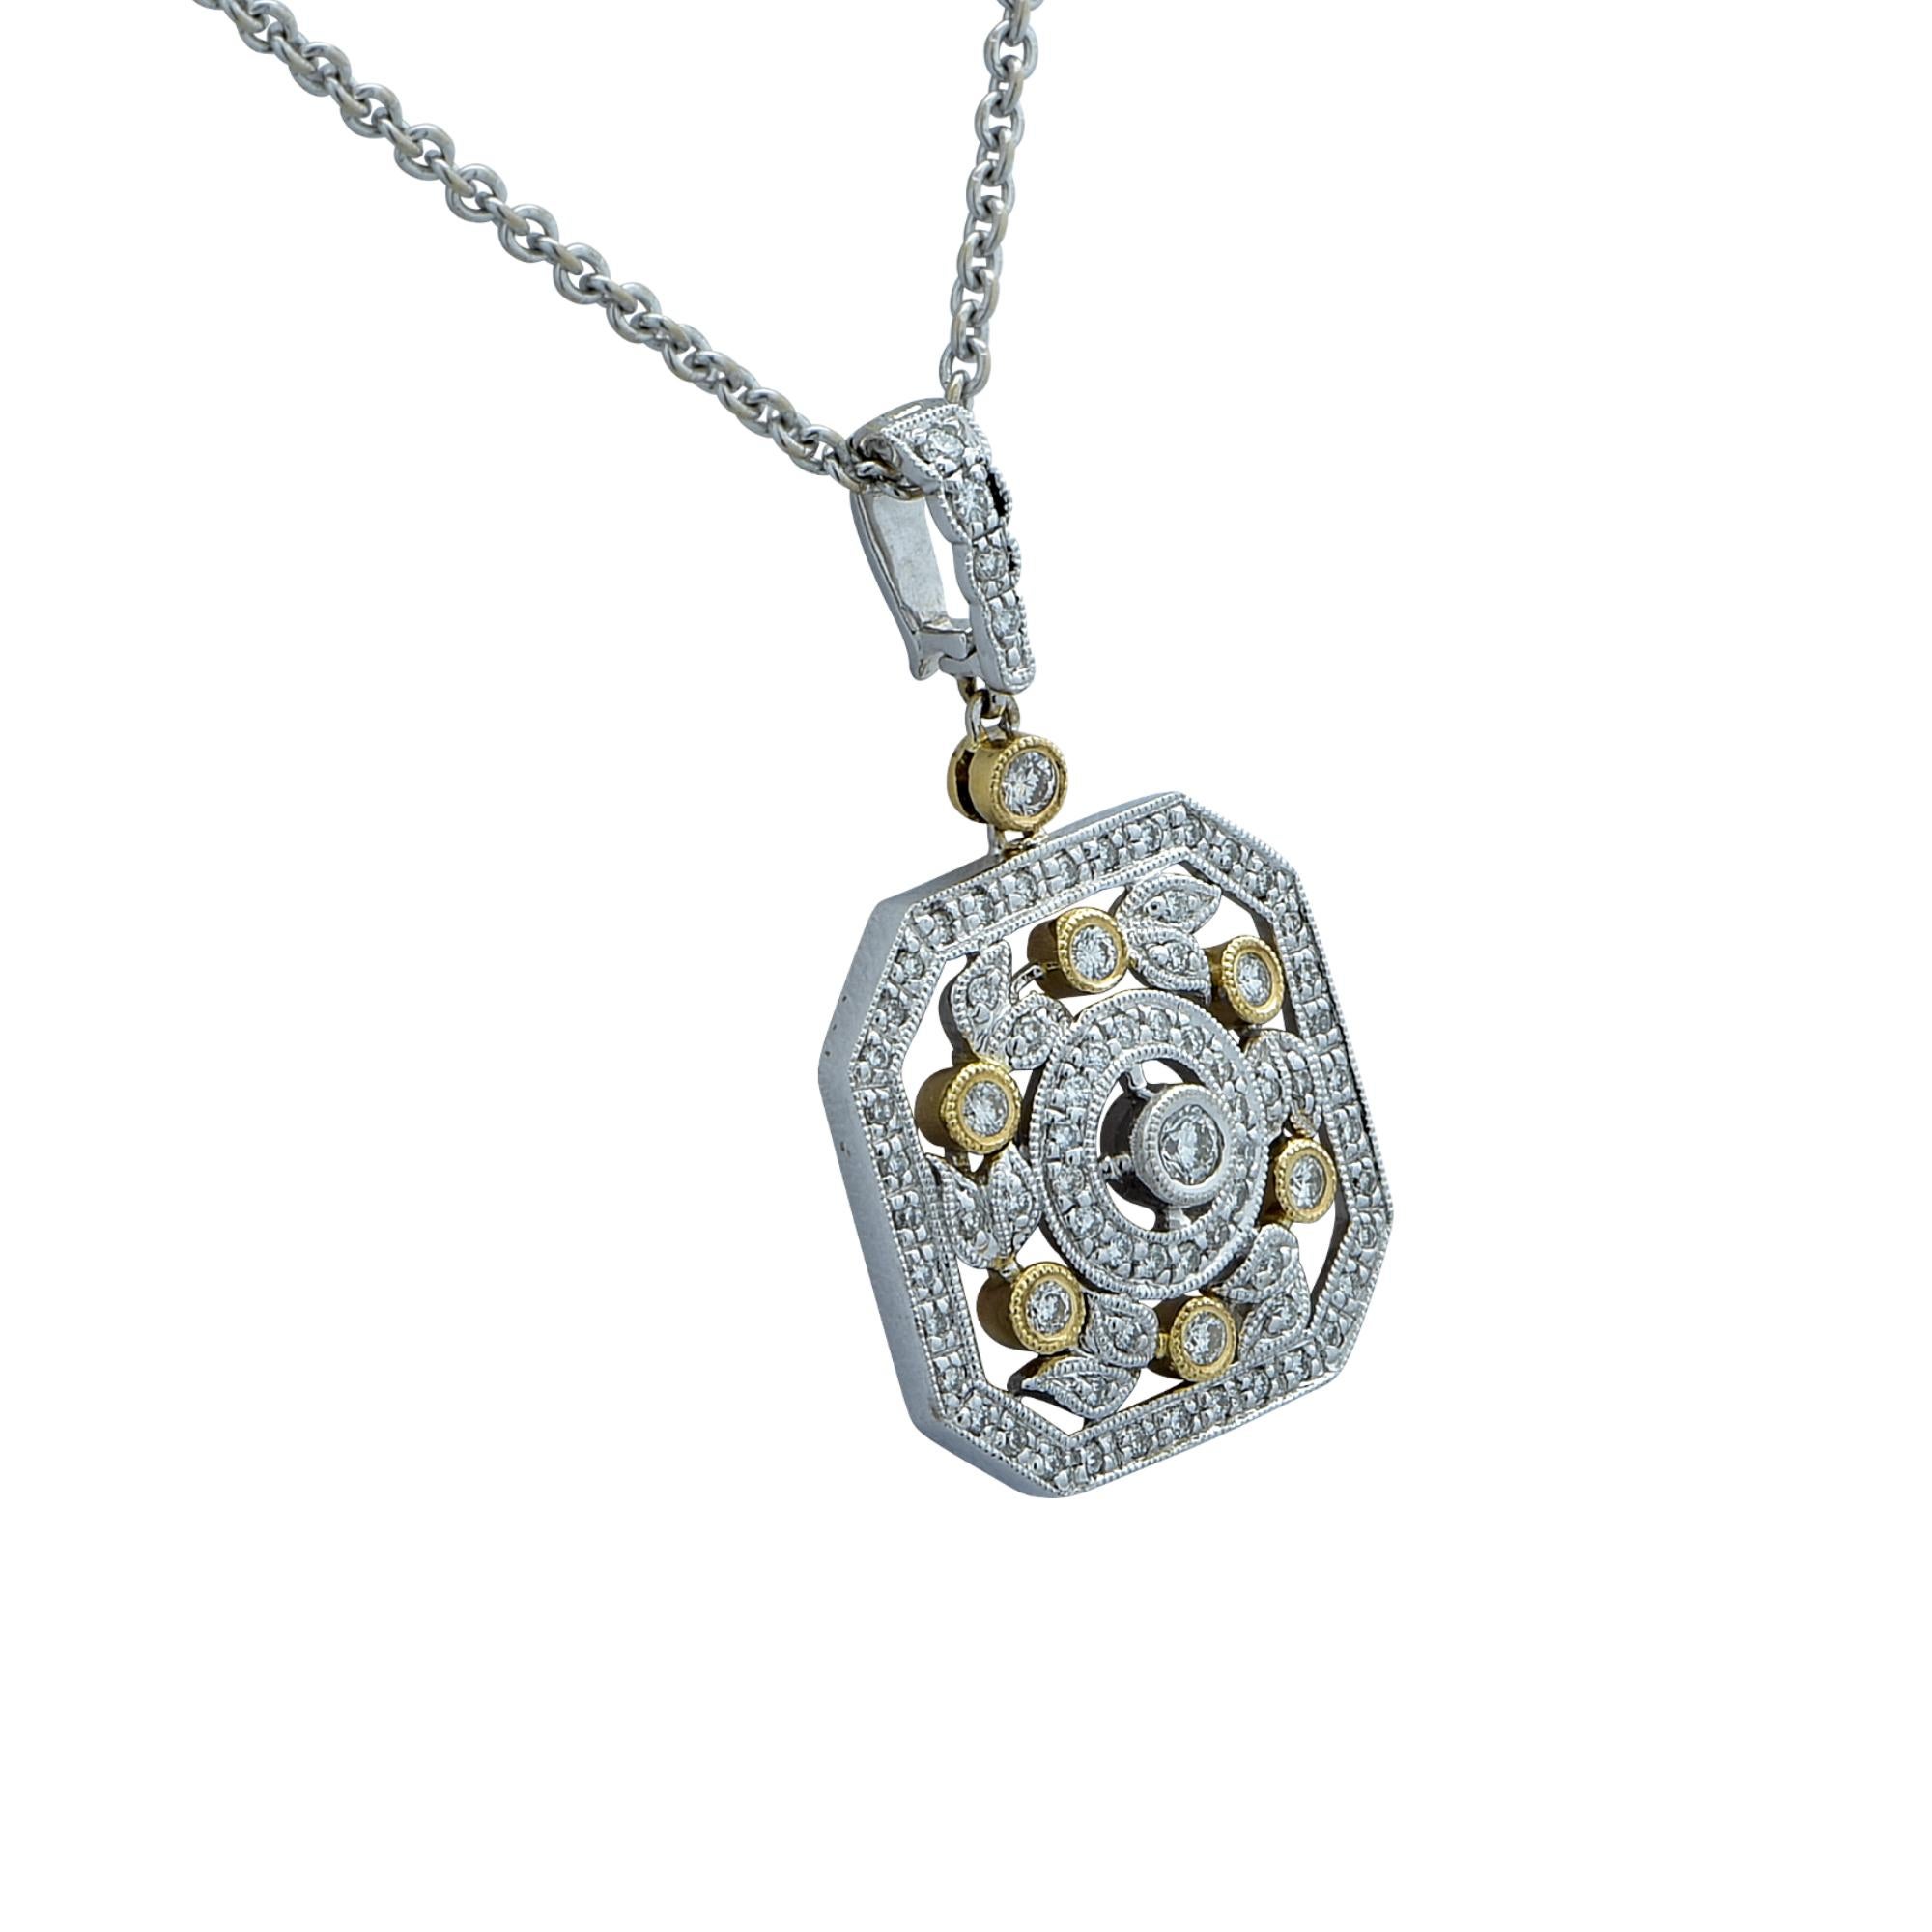 This fabulous necklace is crafted 14k white and yellow gold and studded with 52 round brilliant cut diamonds weighing approximately .60 carats total, G-H Color, SI Clarity.  The chain measures 16 inches in length and the pendant measures .8 inches